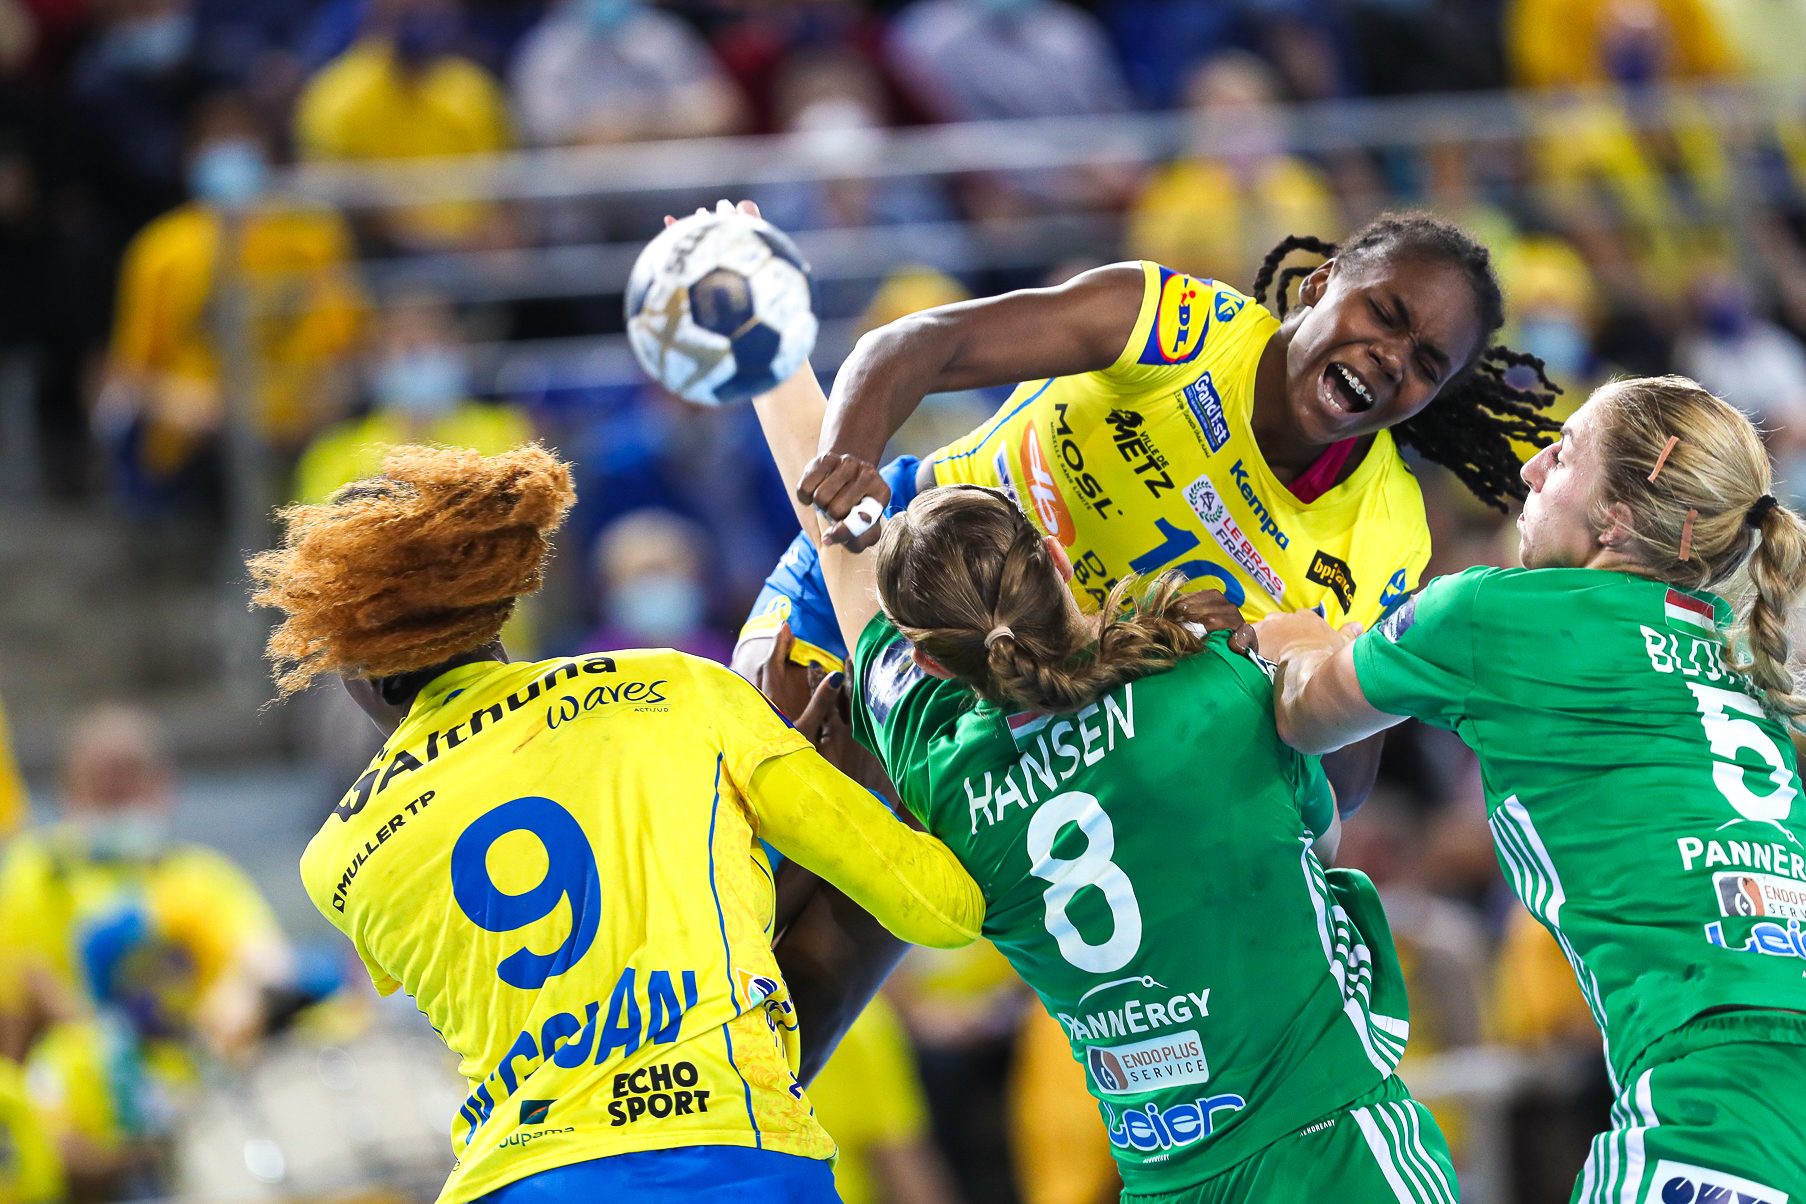 Meline Nocandy of Metz Handball during the EHF Women's Champions League match between Metz and Gyori on October 23, 2021 in Metz, France. (Photo by Bertrand Delhomme/Icon Sport) - Meline NOCANDY - Metz (France)